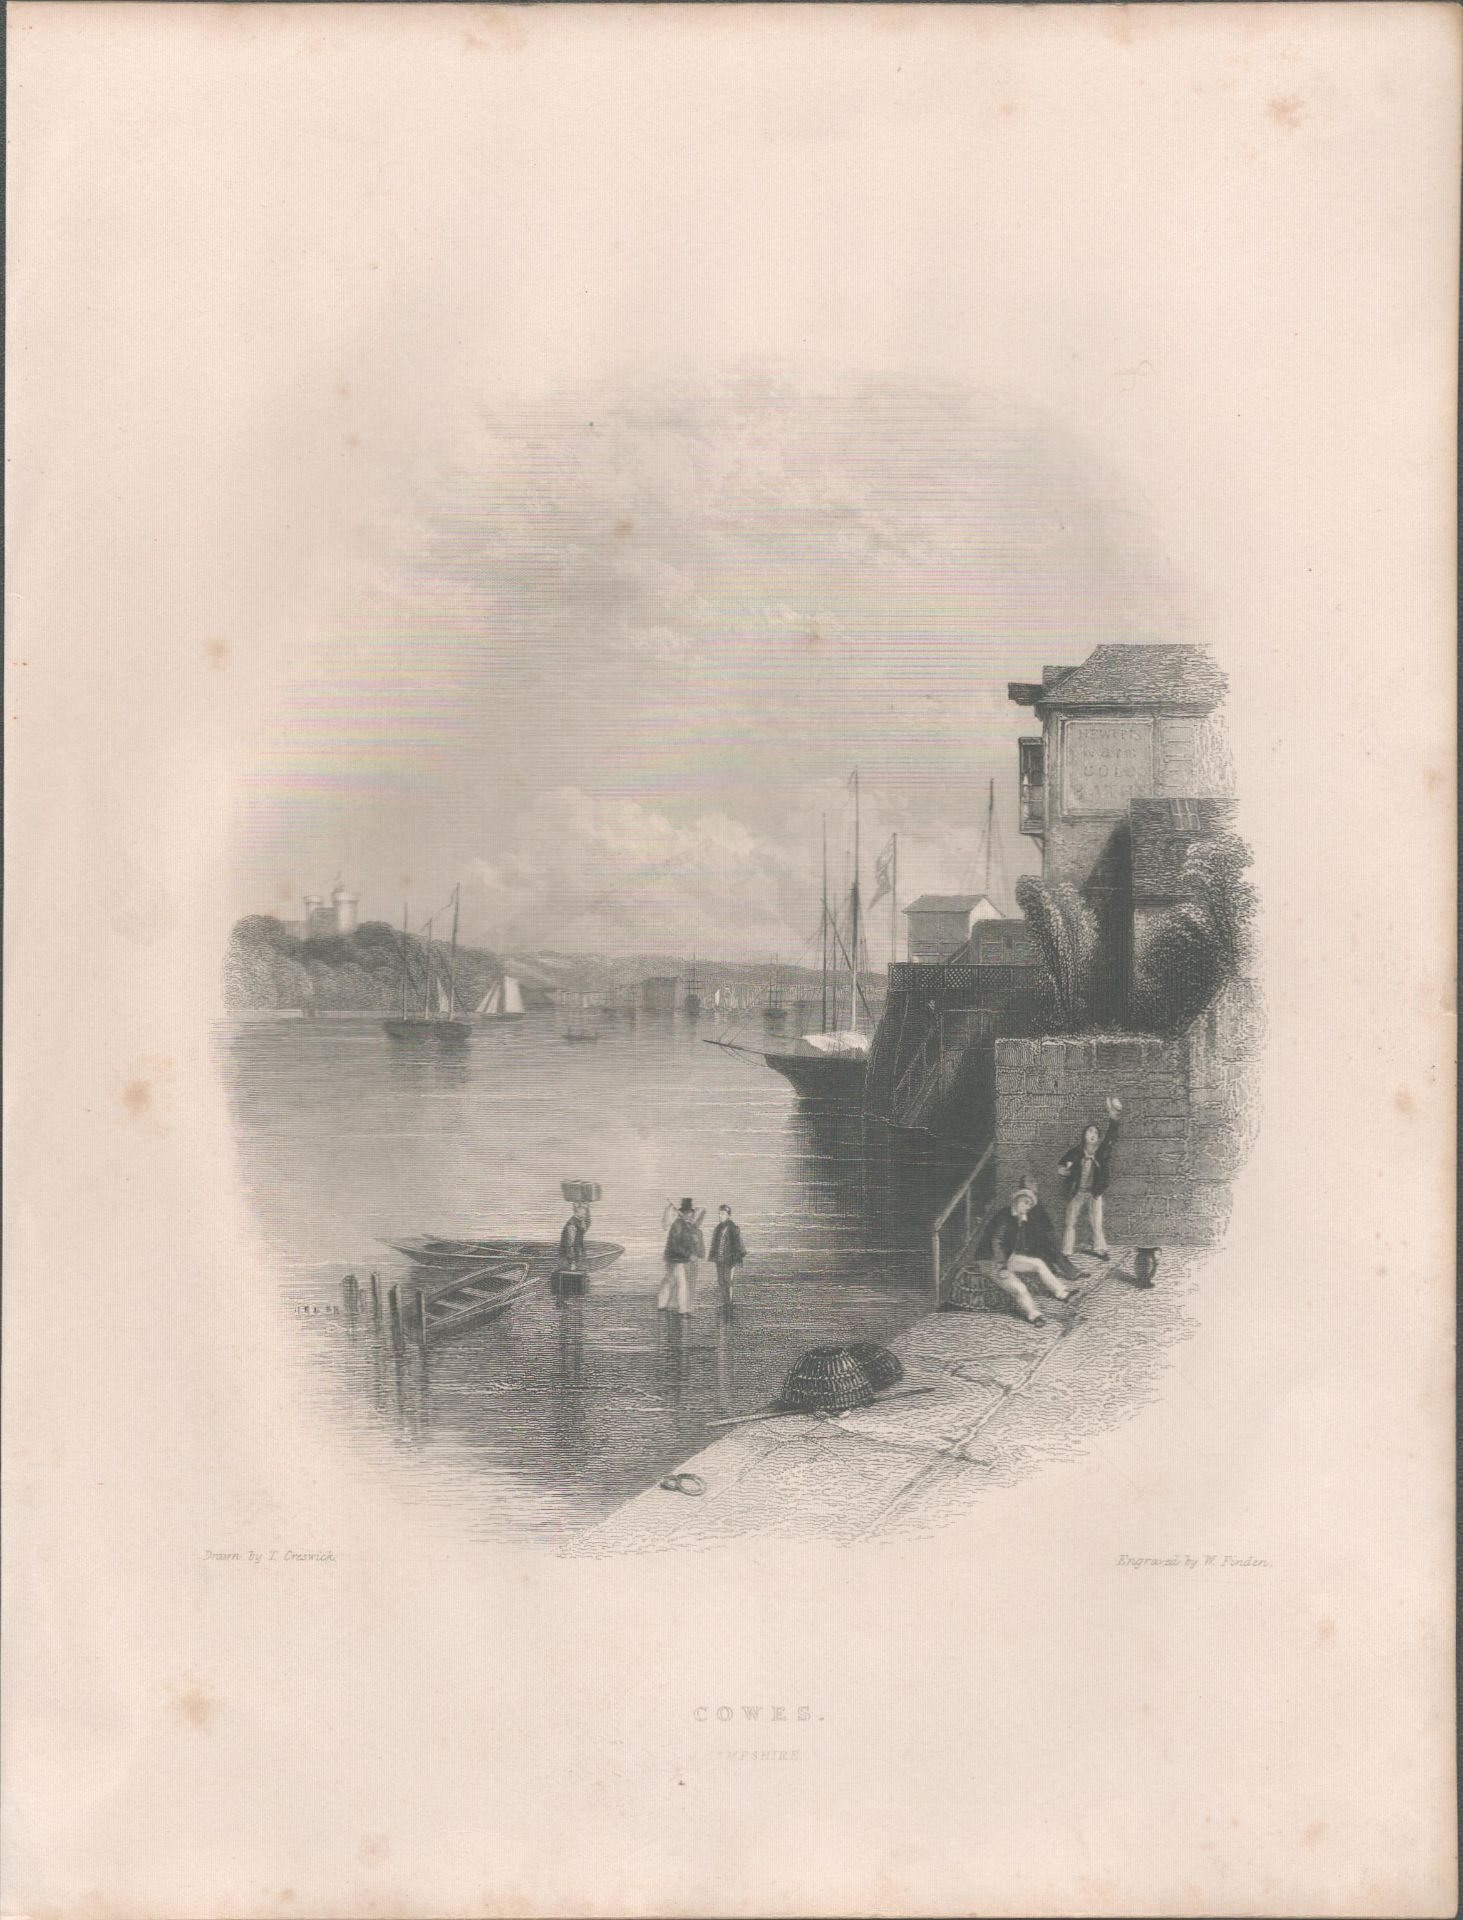 Isle of Cowes Antique 1842 Steel Engraving.